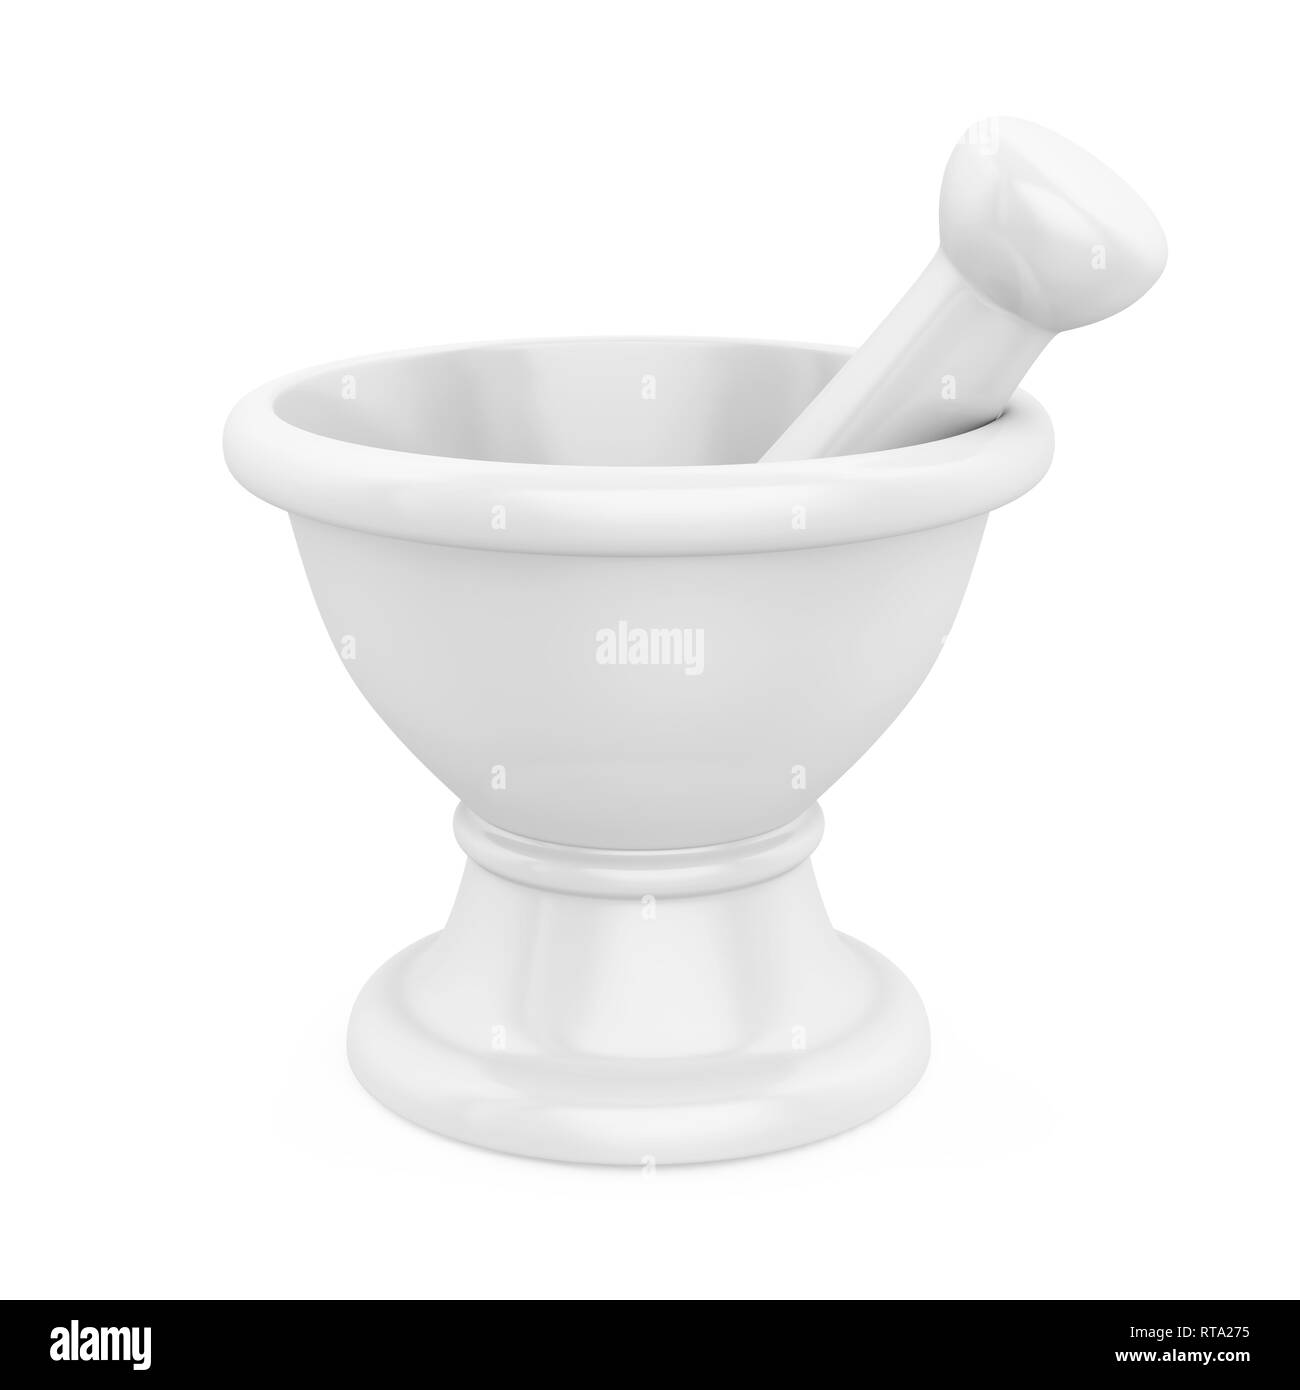 Mortar and Pestle Isolated Stock Photo